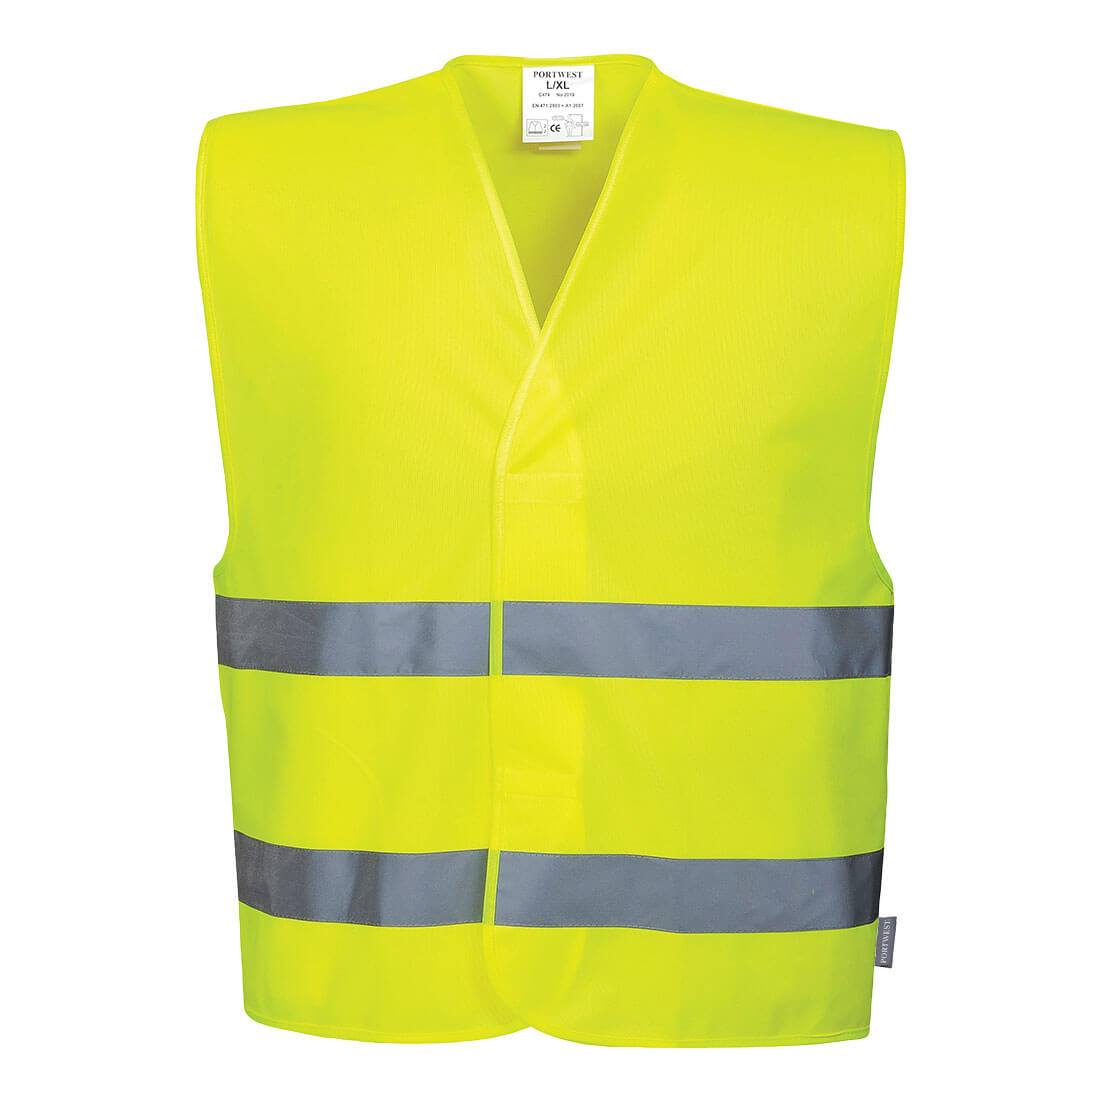 Image of Portwest Two Band Class 2 Hi Vis Waistcoat Yellow 4XL / 5XL